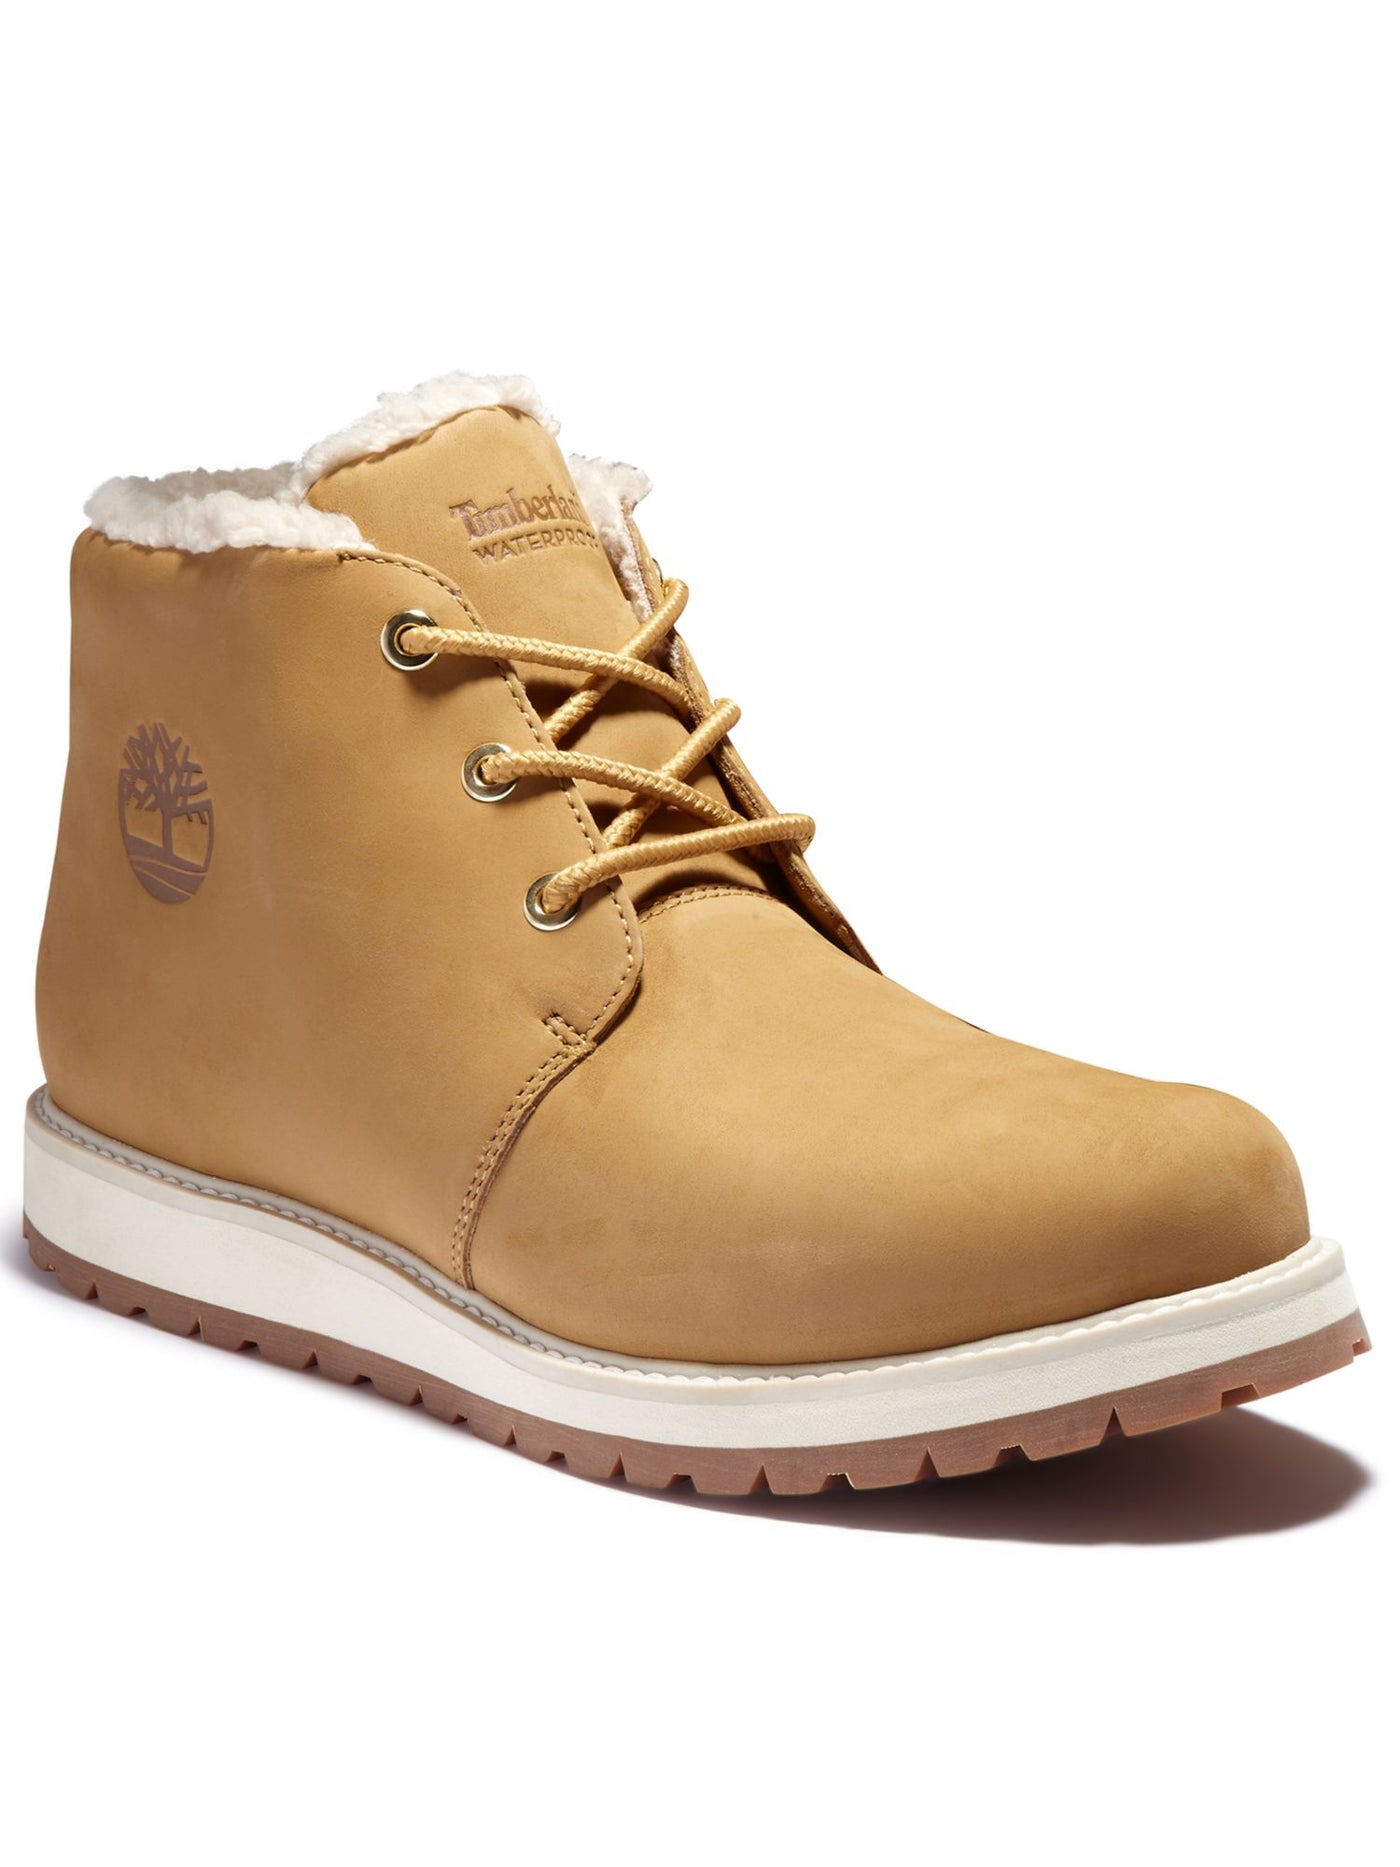 TIMBERLAND Mens Beige Water Resistant Lug Sole Richmond Ridge Round Toe Wedge Lace-Up Leather Chukka Boots 10 M